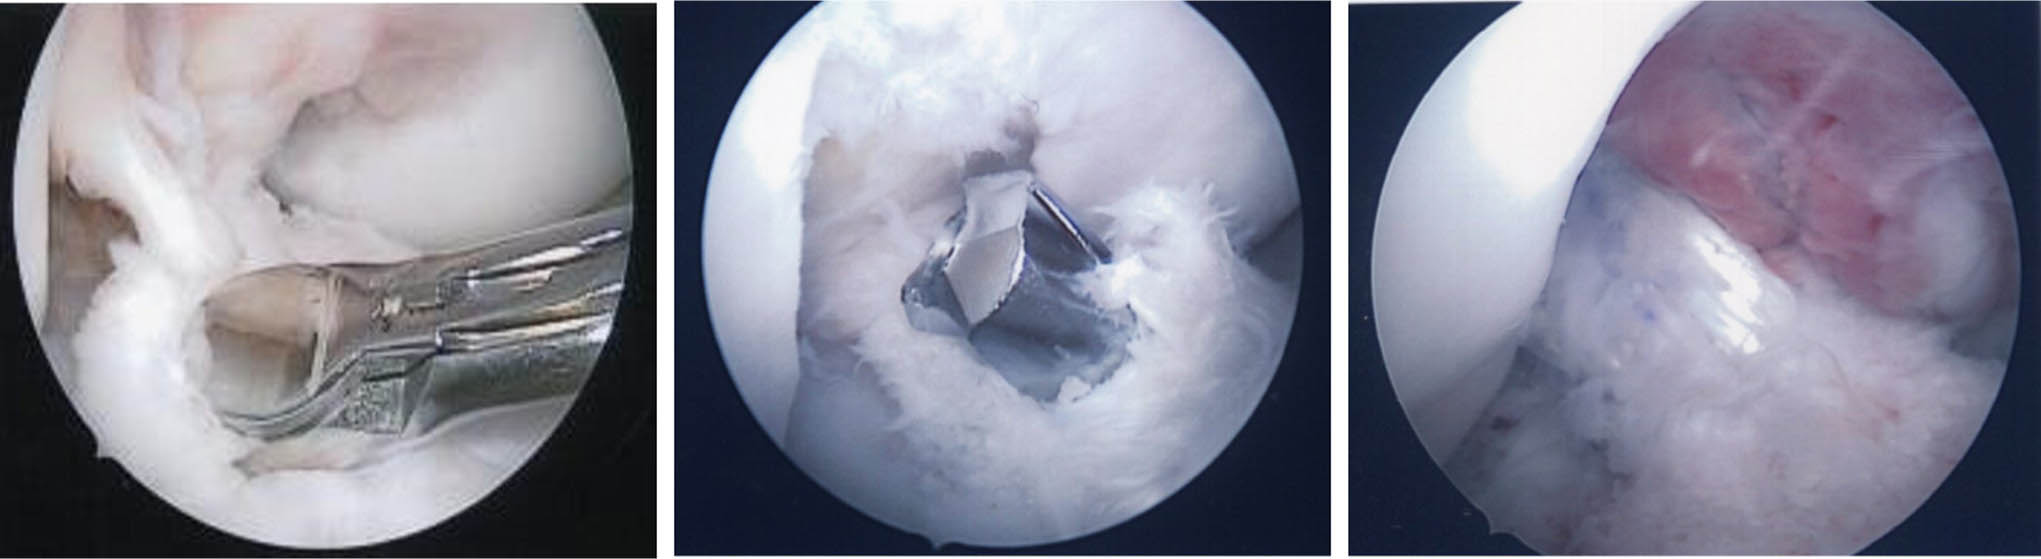 Fig. 1 
          Arthroscopic pictures of anterior cruciate ligament (ACL) remnant harvest and reconstruction. ACL remnant was harvested by arthroscopic punch (Left image). The ACL remnant was partially preserved and reamed to create bone tunnel (Middle image). The reconstructed graft was passed through the bone tunnel and surrounded by ACL remnant (Right image).
        